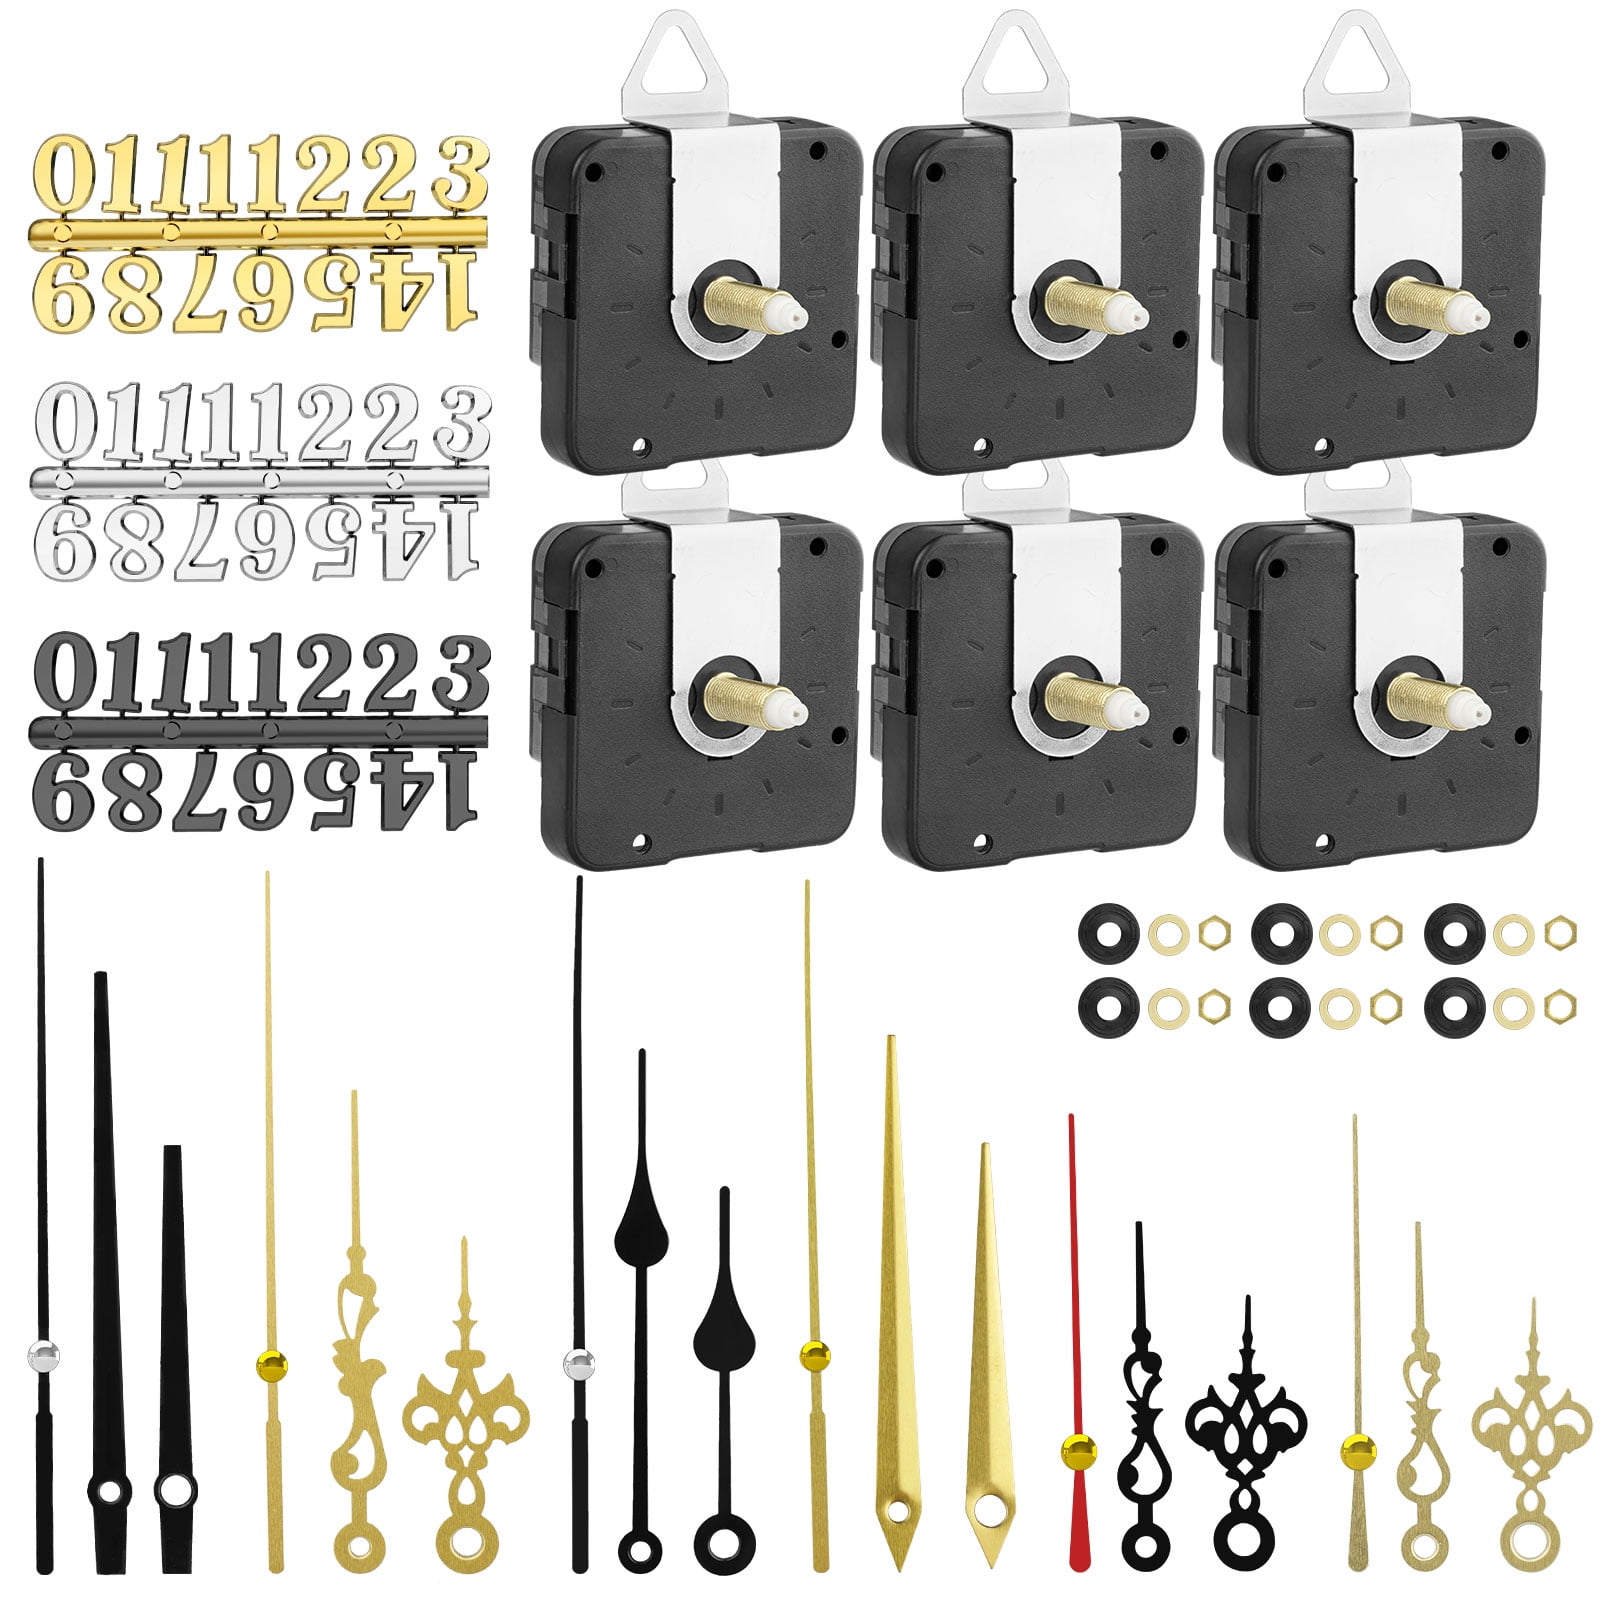 6Pcs Quartz DIY Wall Clock, Clock Numerals Kit, Movement Mechanism Battery  Operated Clock Motor Kit with 6 Different Pairs of Hands for DIY Clock